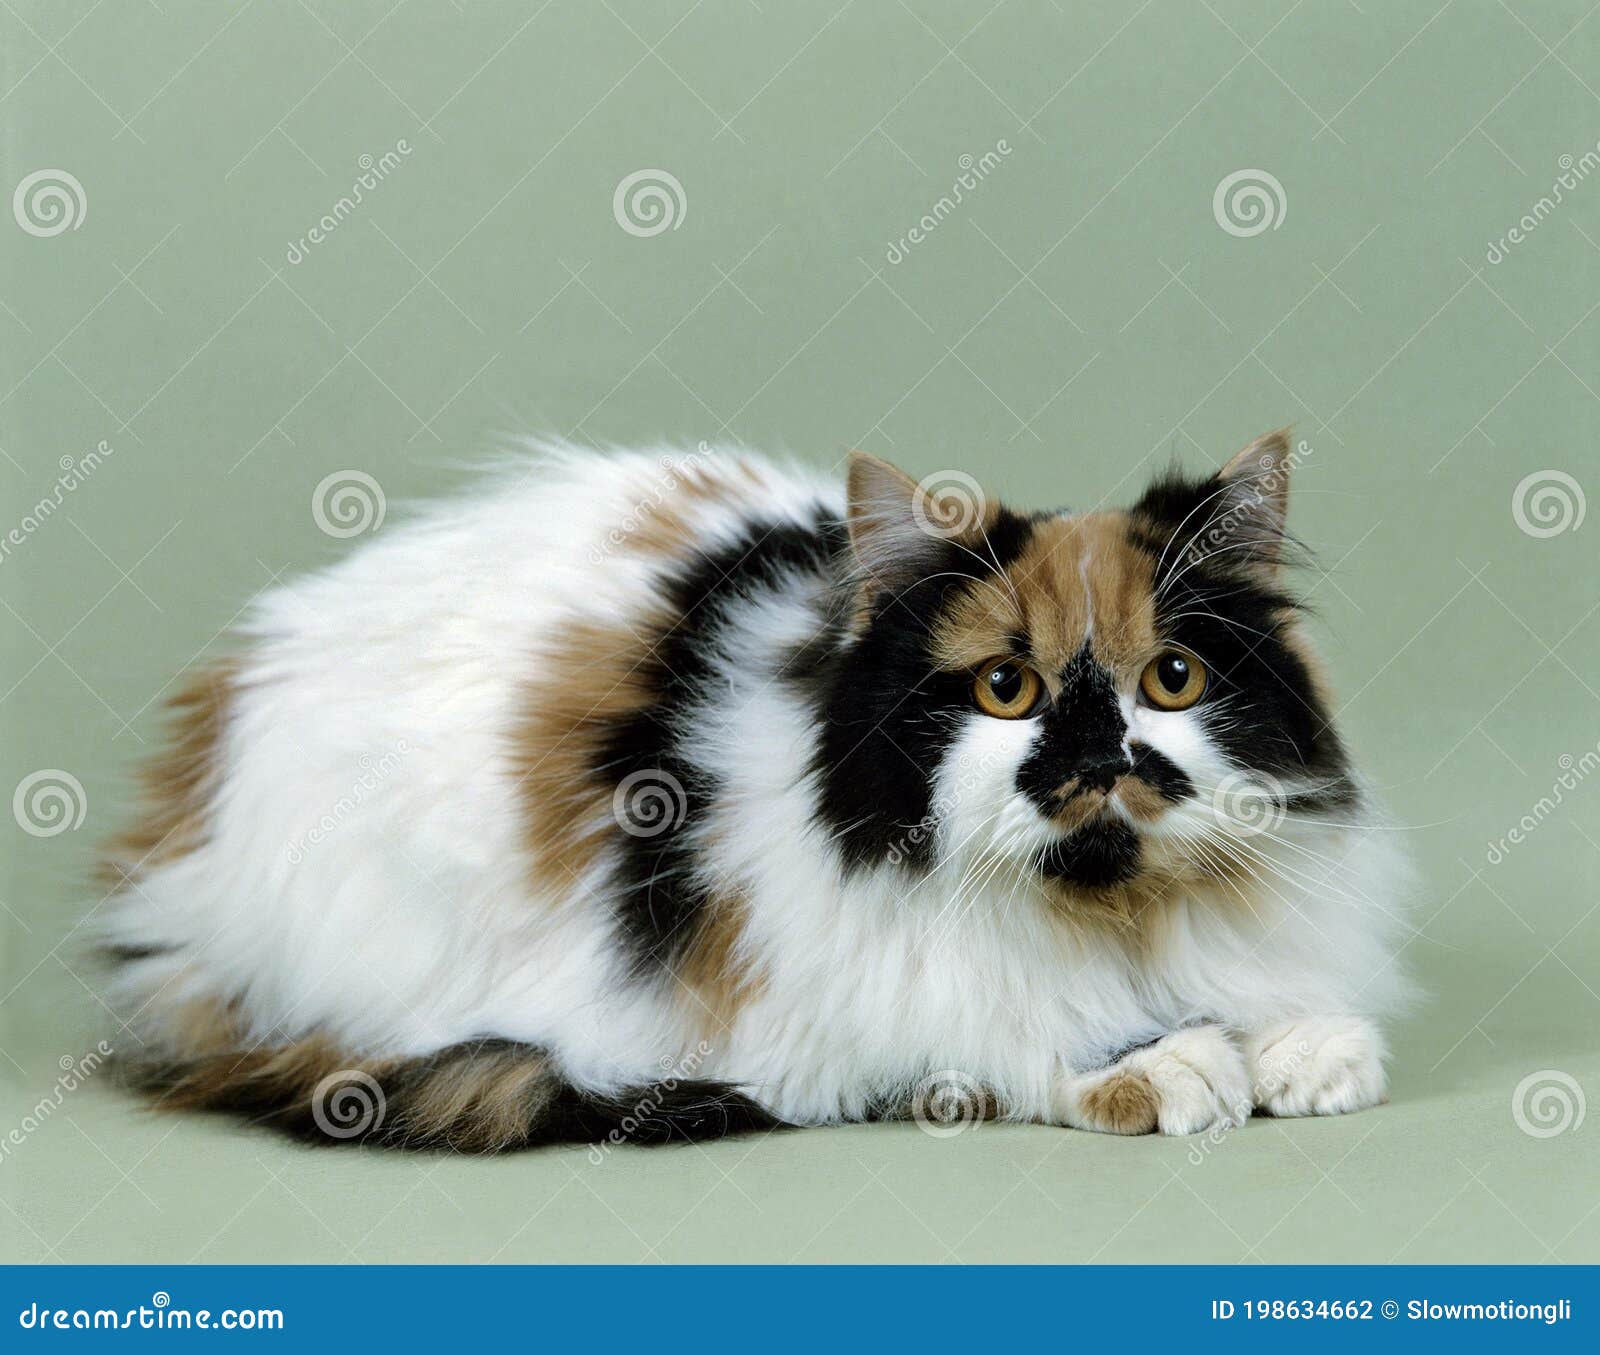 arlequin persian domestic cat laying against green background